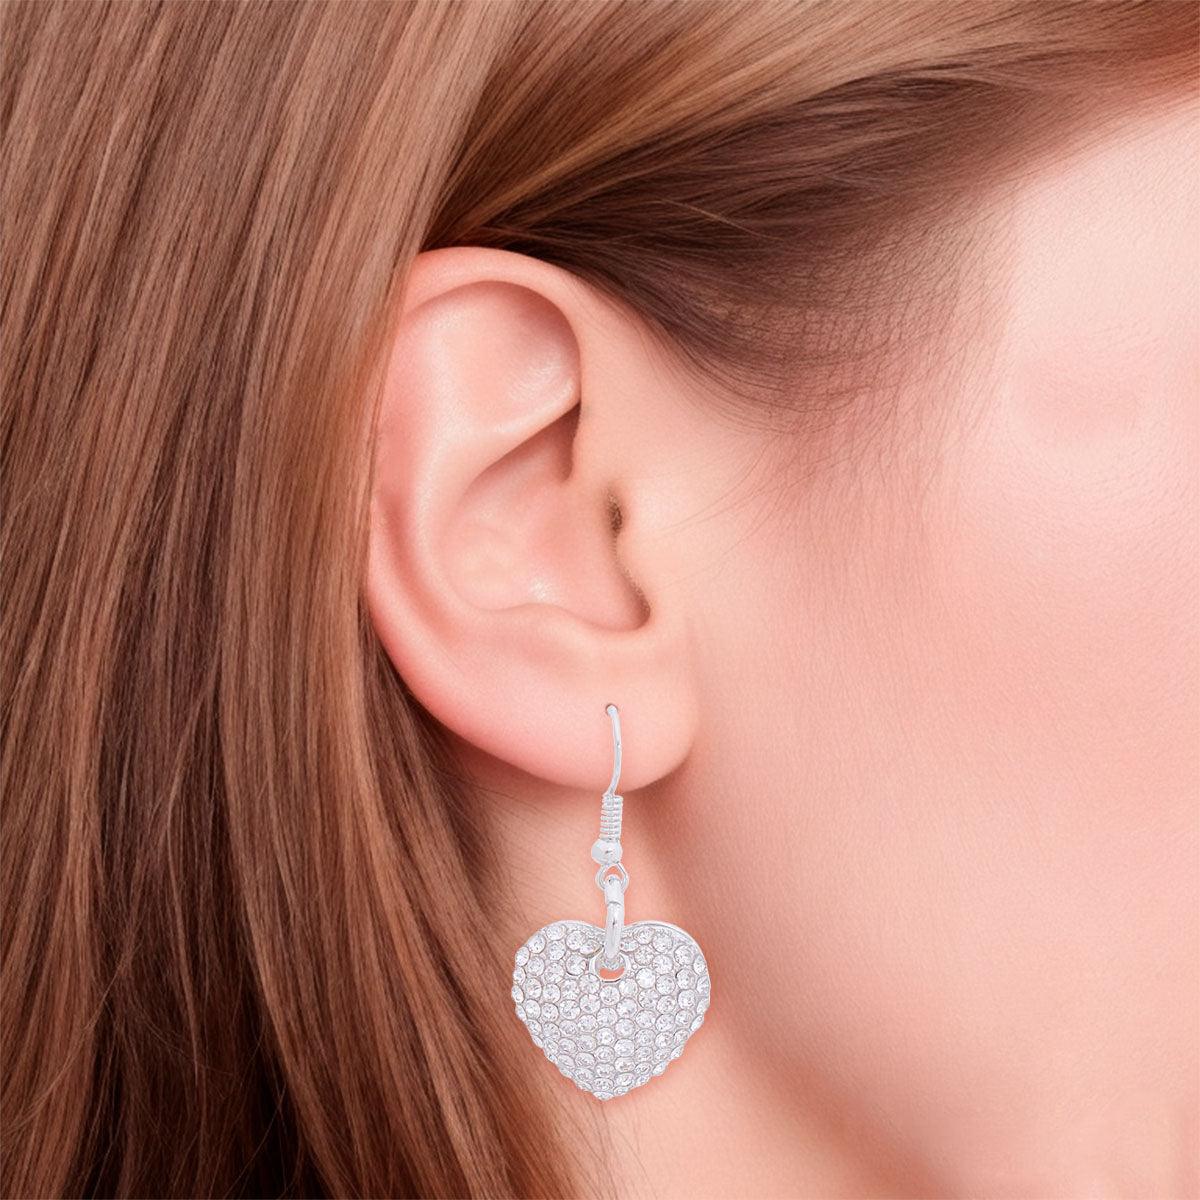 Dazzle in Style Fashion Jewelry: Silver Heart Earrings with Clear Rhinestones